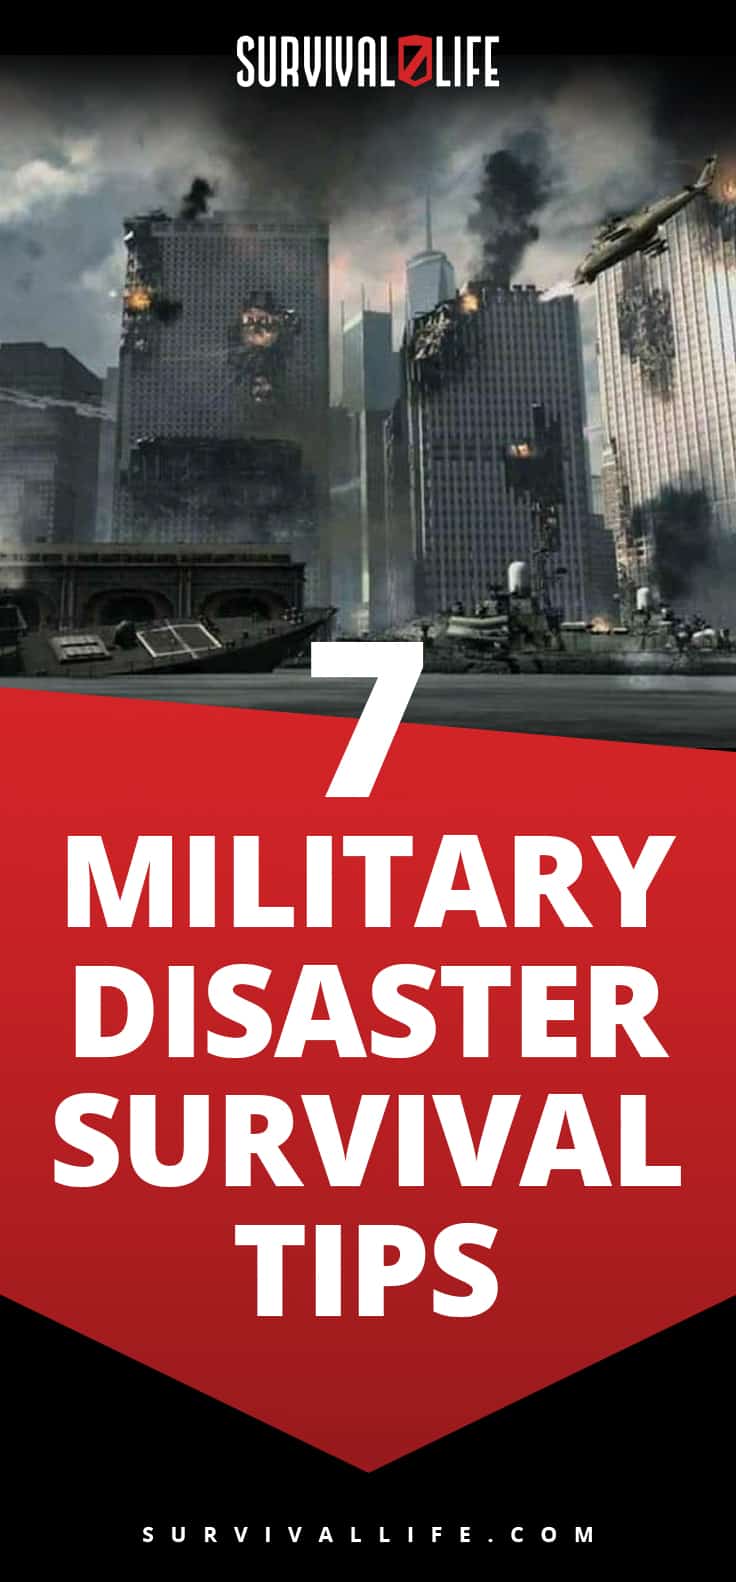 Military Disaster Survival Tips | Survival Life | https://survivallife.com/military-disaster-survival-tips/